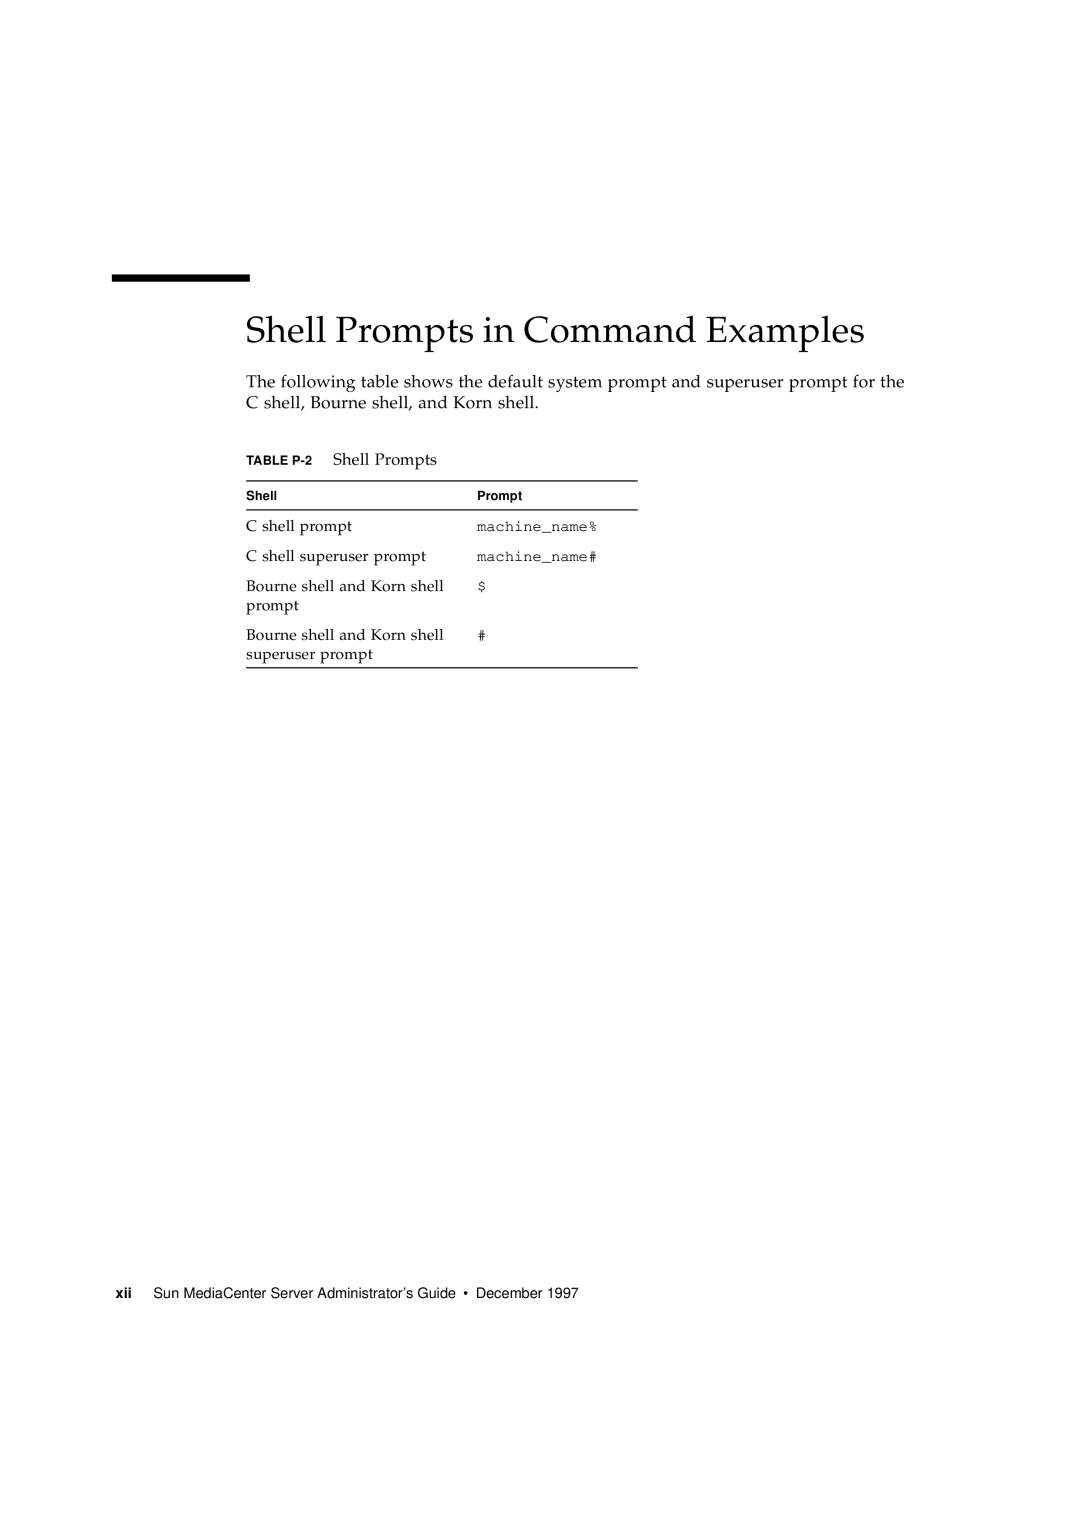 Sun Microsystems 2.1 manual Shell Prompts in Command Examples, TABLE P-2 Shell Prompts 